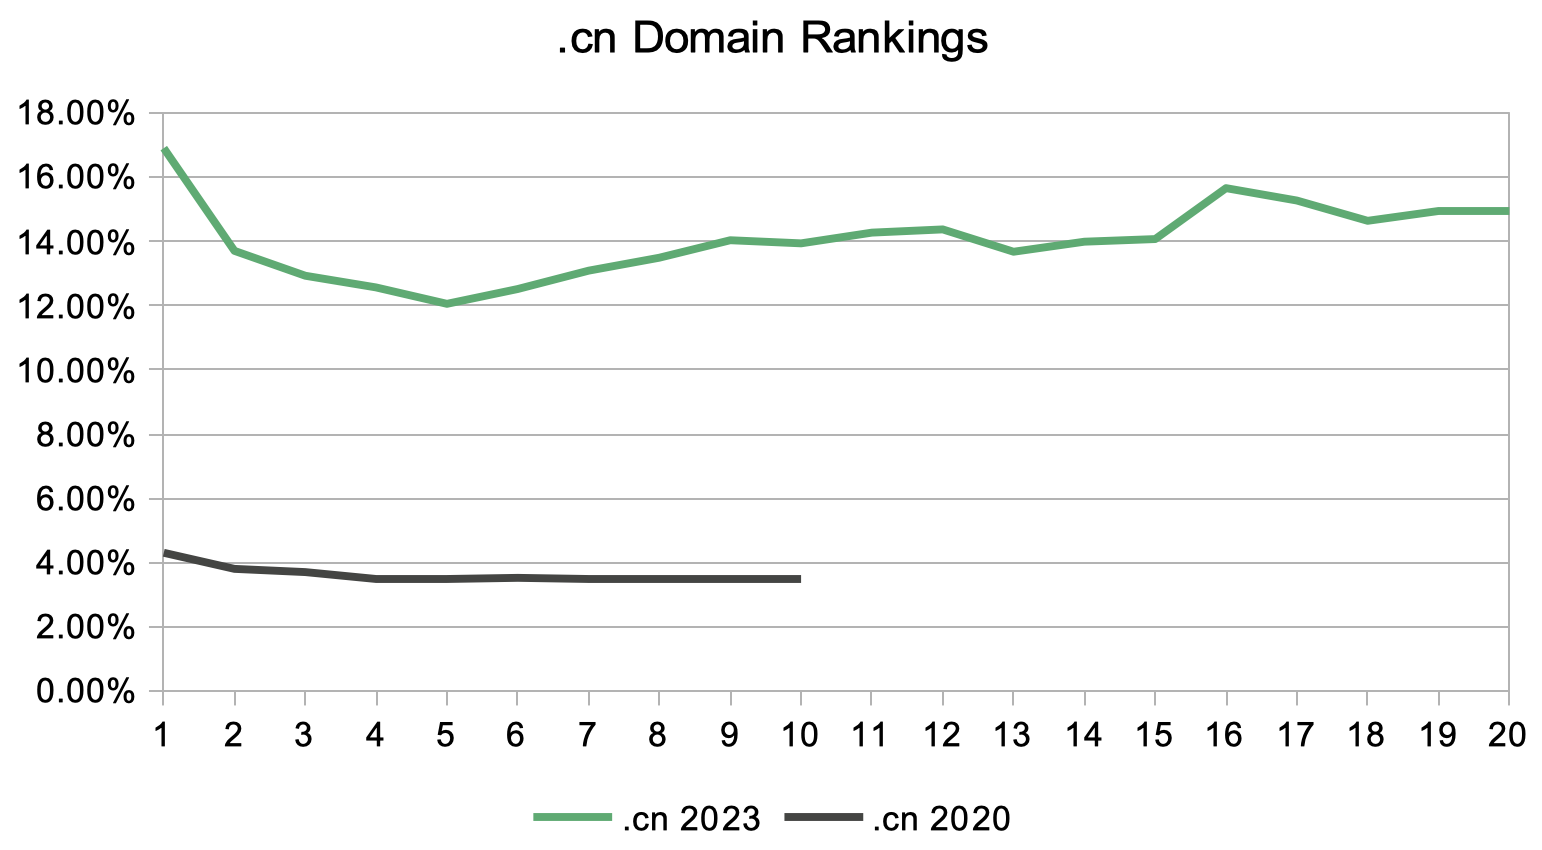 percantage or ranking URLs per position from a .cn domain